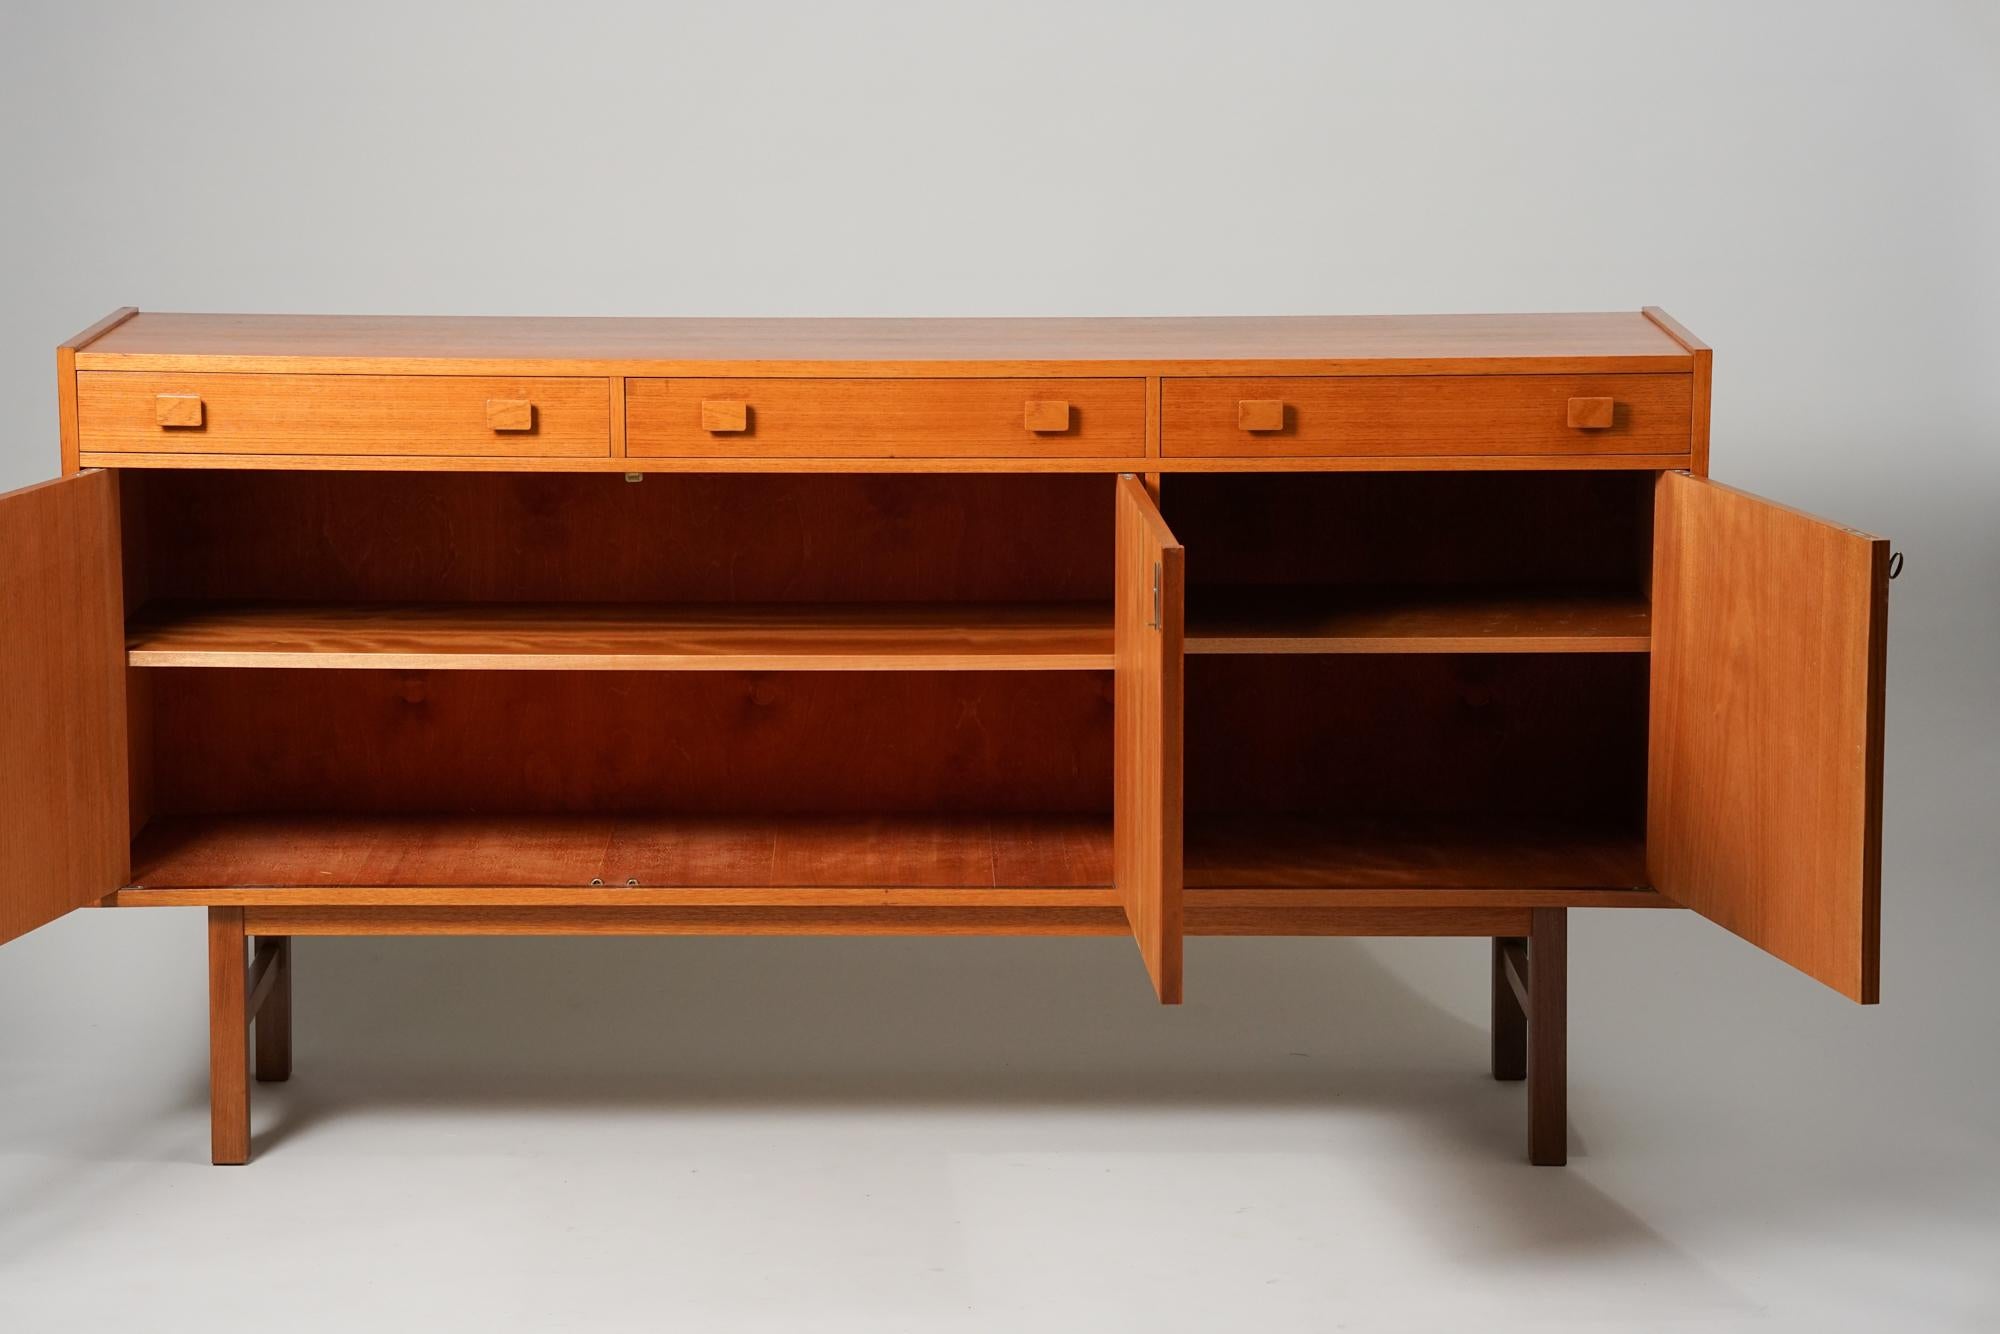 Mid-Century Modern Swedish teak sideboard from the 1960s. A classic Mid-Century Modern style, interesting knob design. Build in sections on the top drawers. Top drawers lined up with green felt. Good vintage condition, minor wear consistent with age